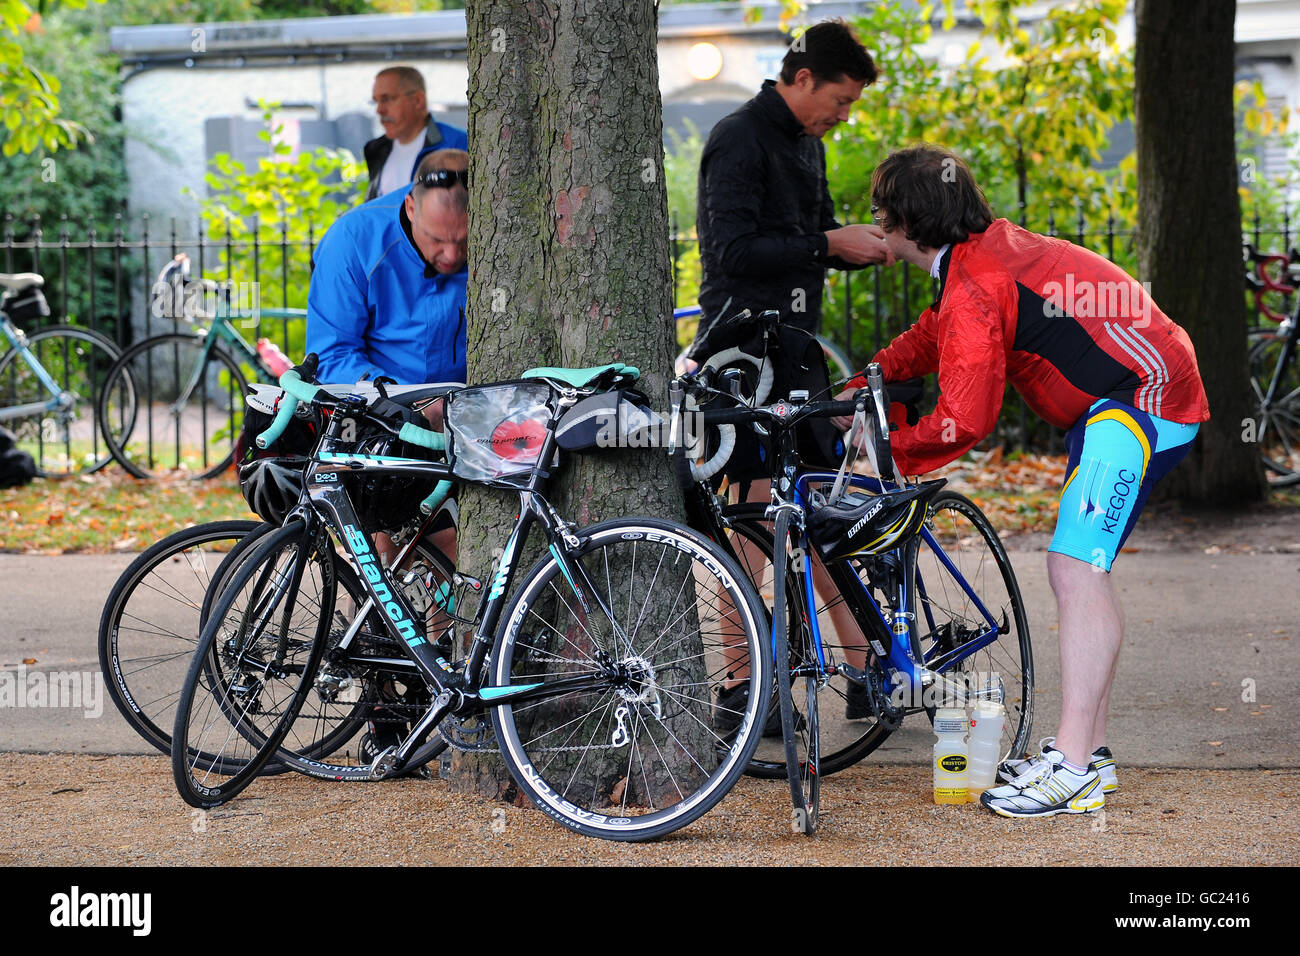 Riders taking part in The Royal British Legion's Pedal to Paris ride get prepared in Greenwich Park, London Stock Photo